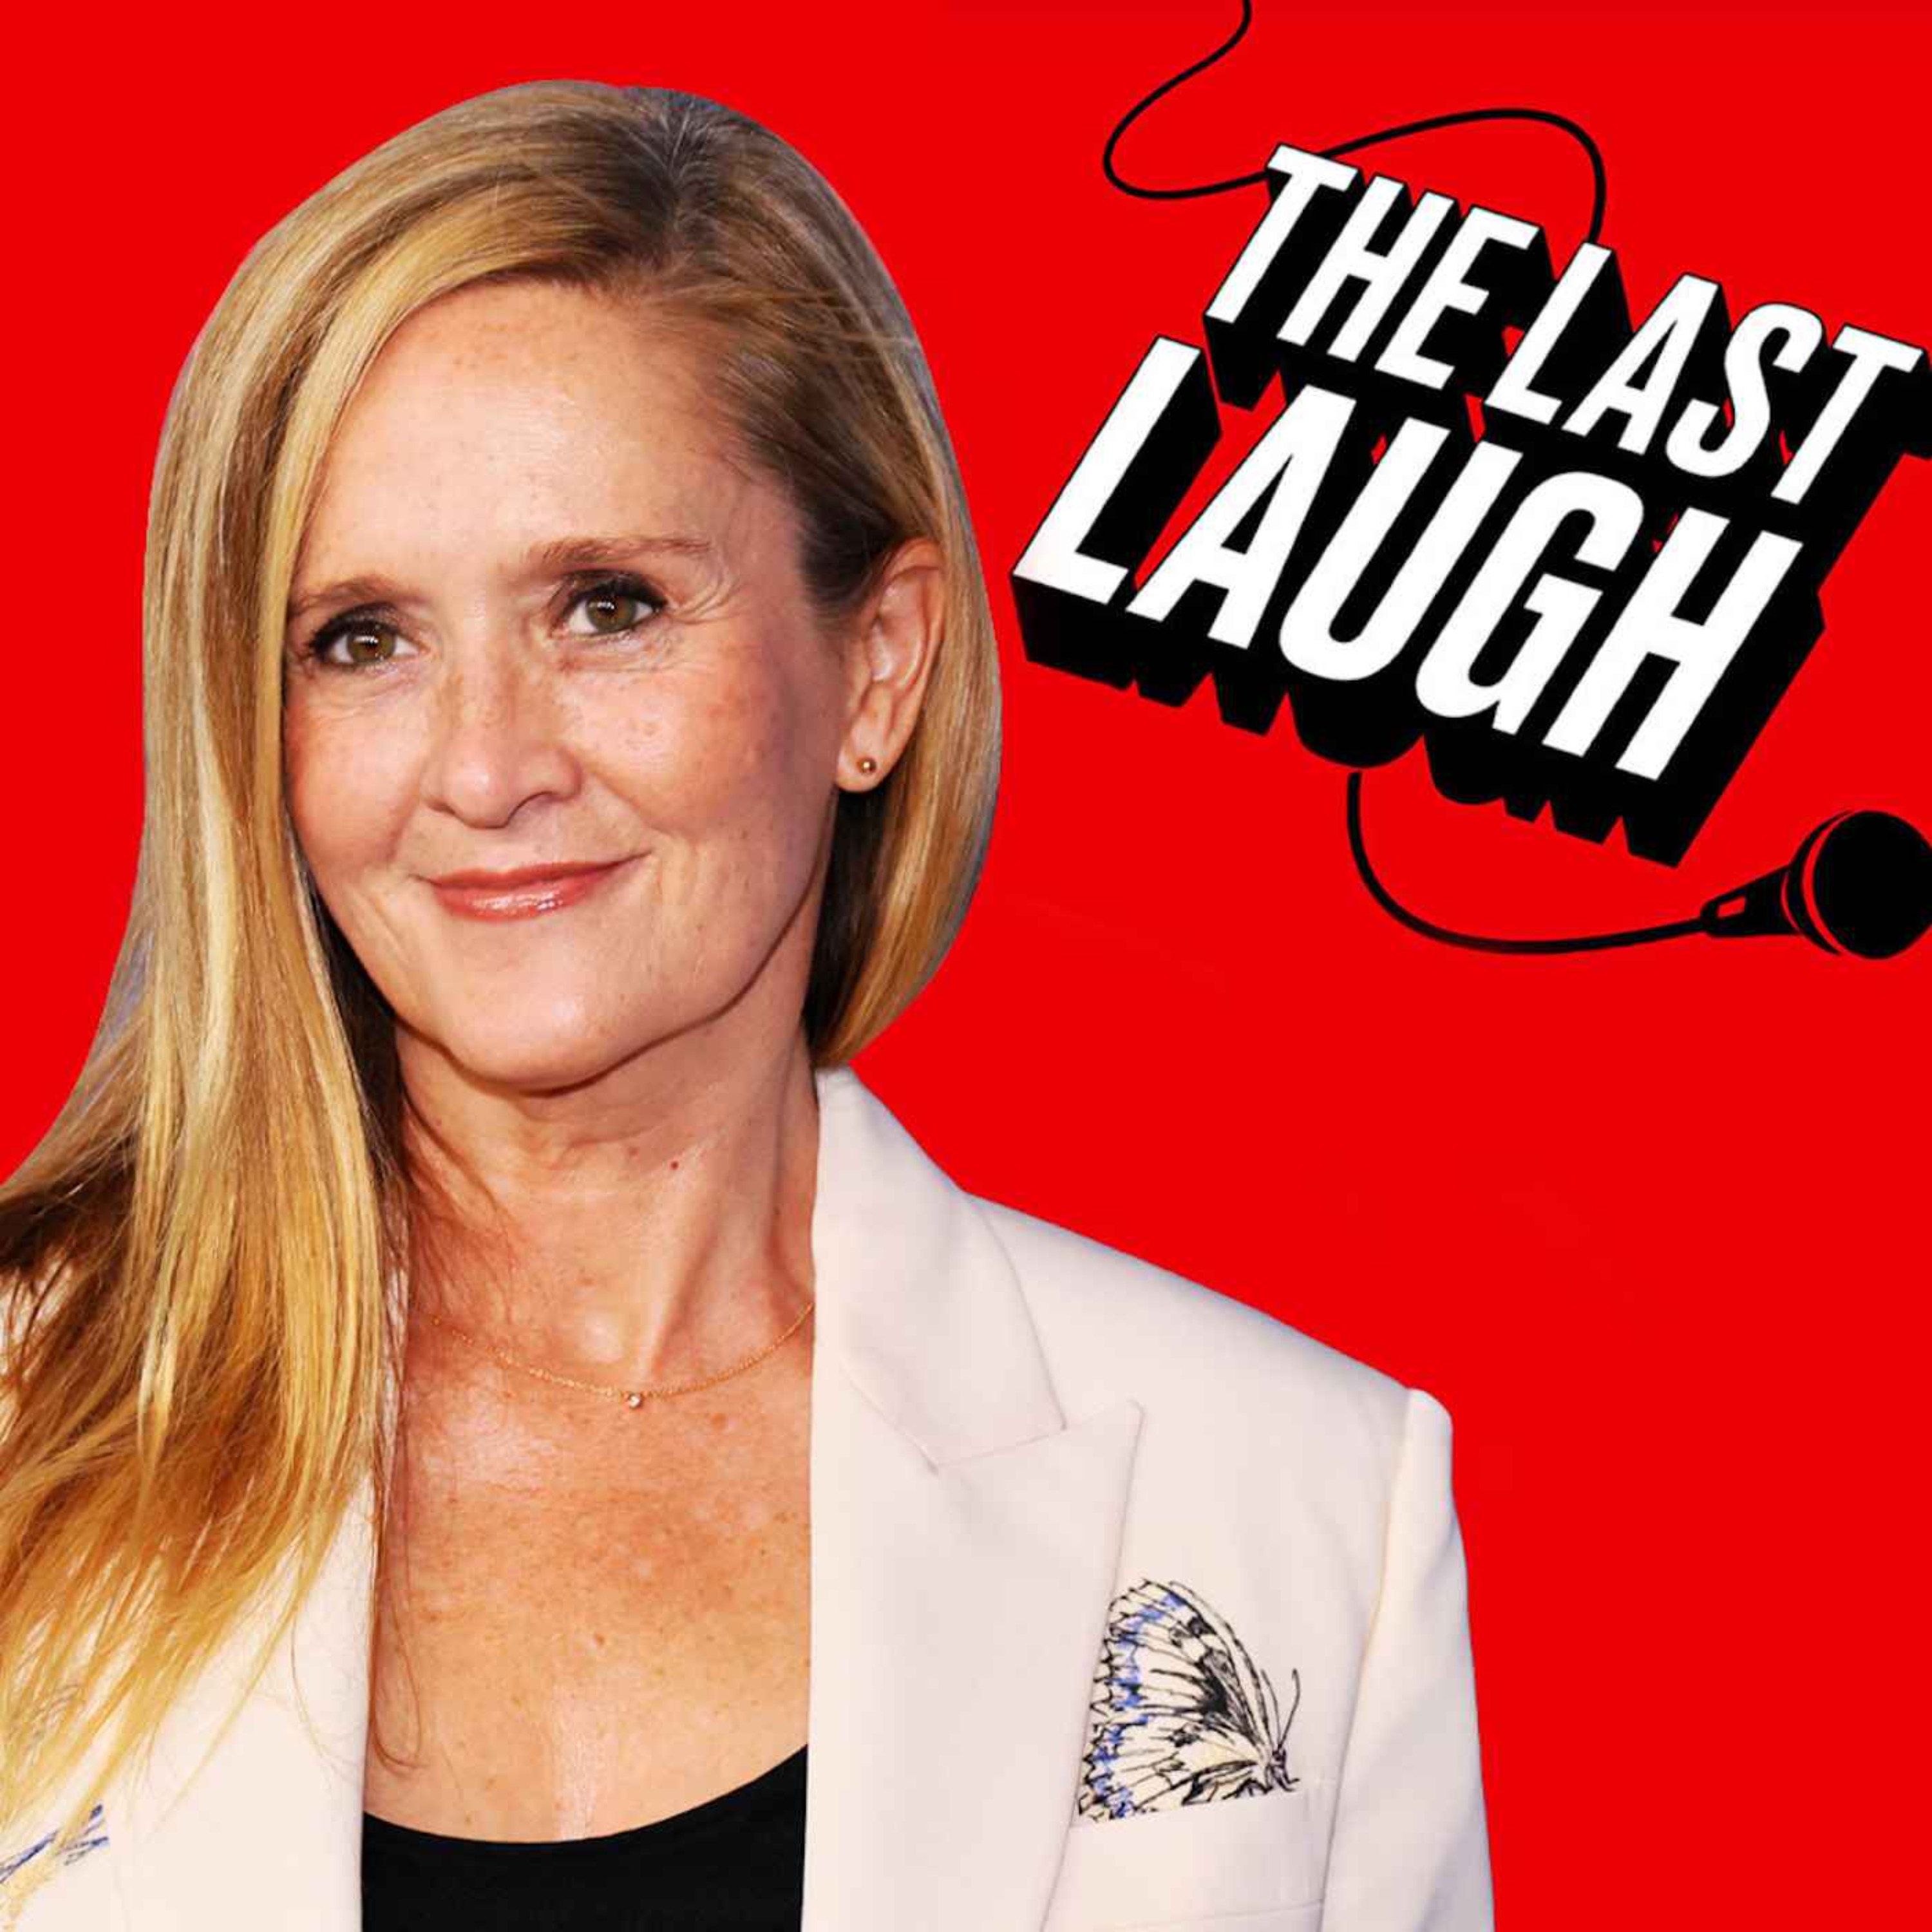 Samantha Bee Returns for Our 200th Episode!